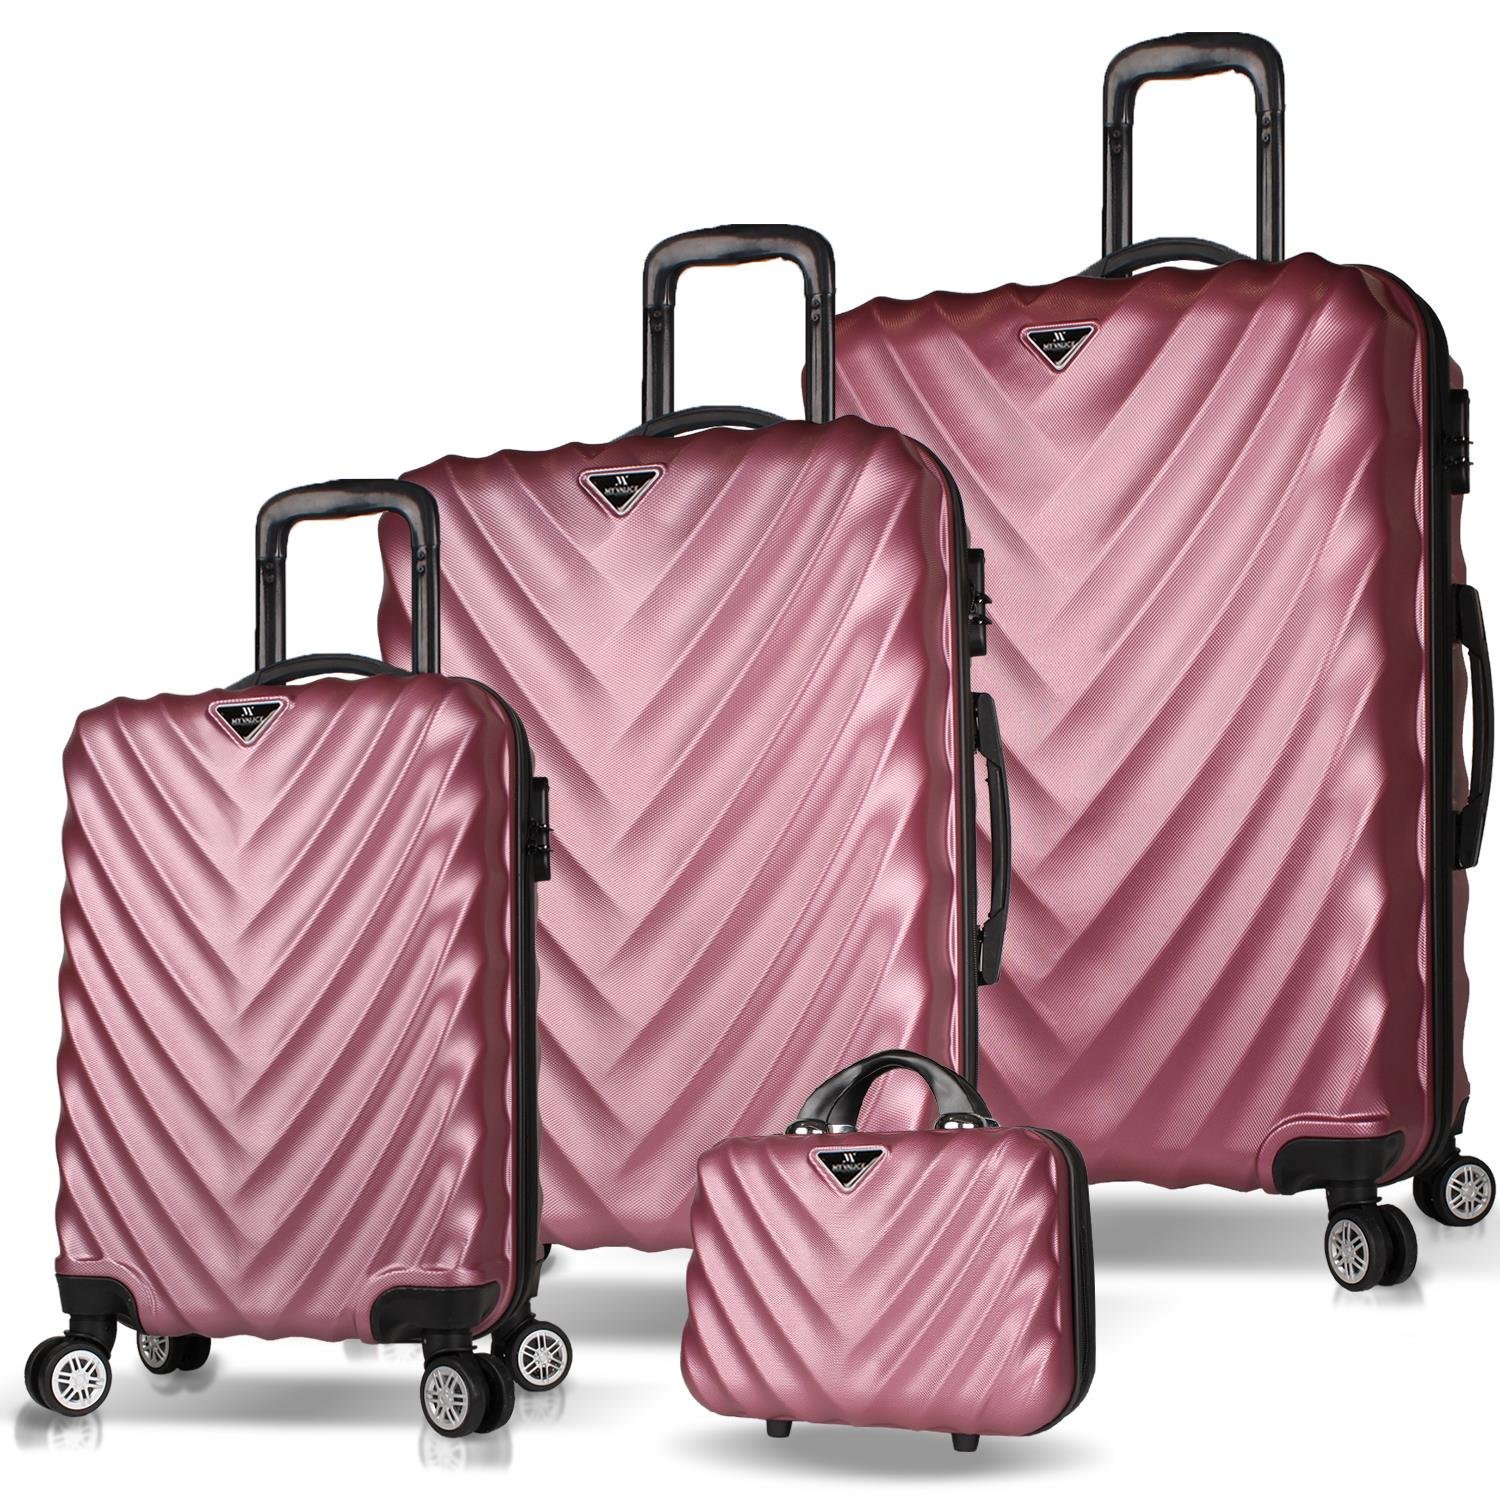 My Valice Lotus Abs Travel Suitcase Set of 4 Rose gold | My Valice